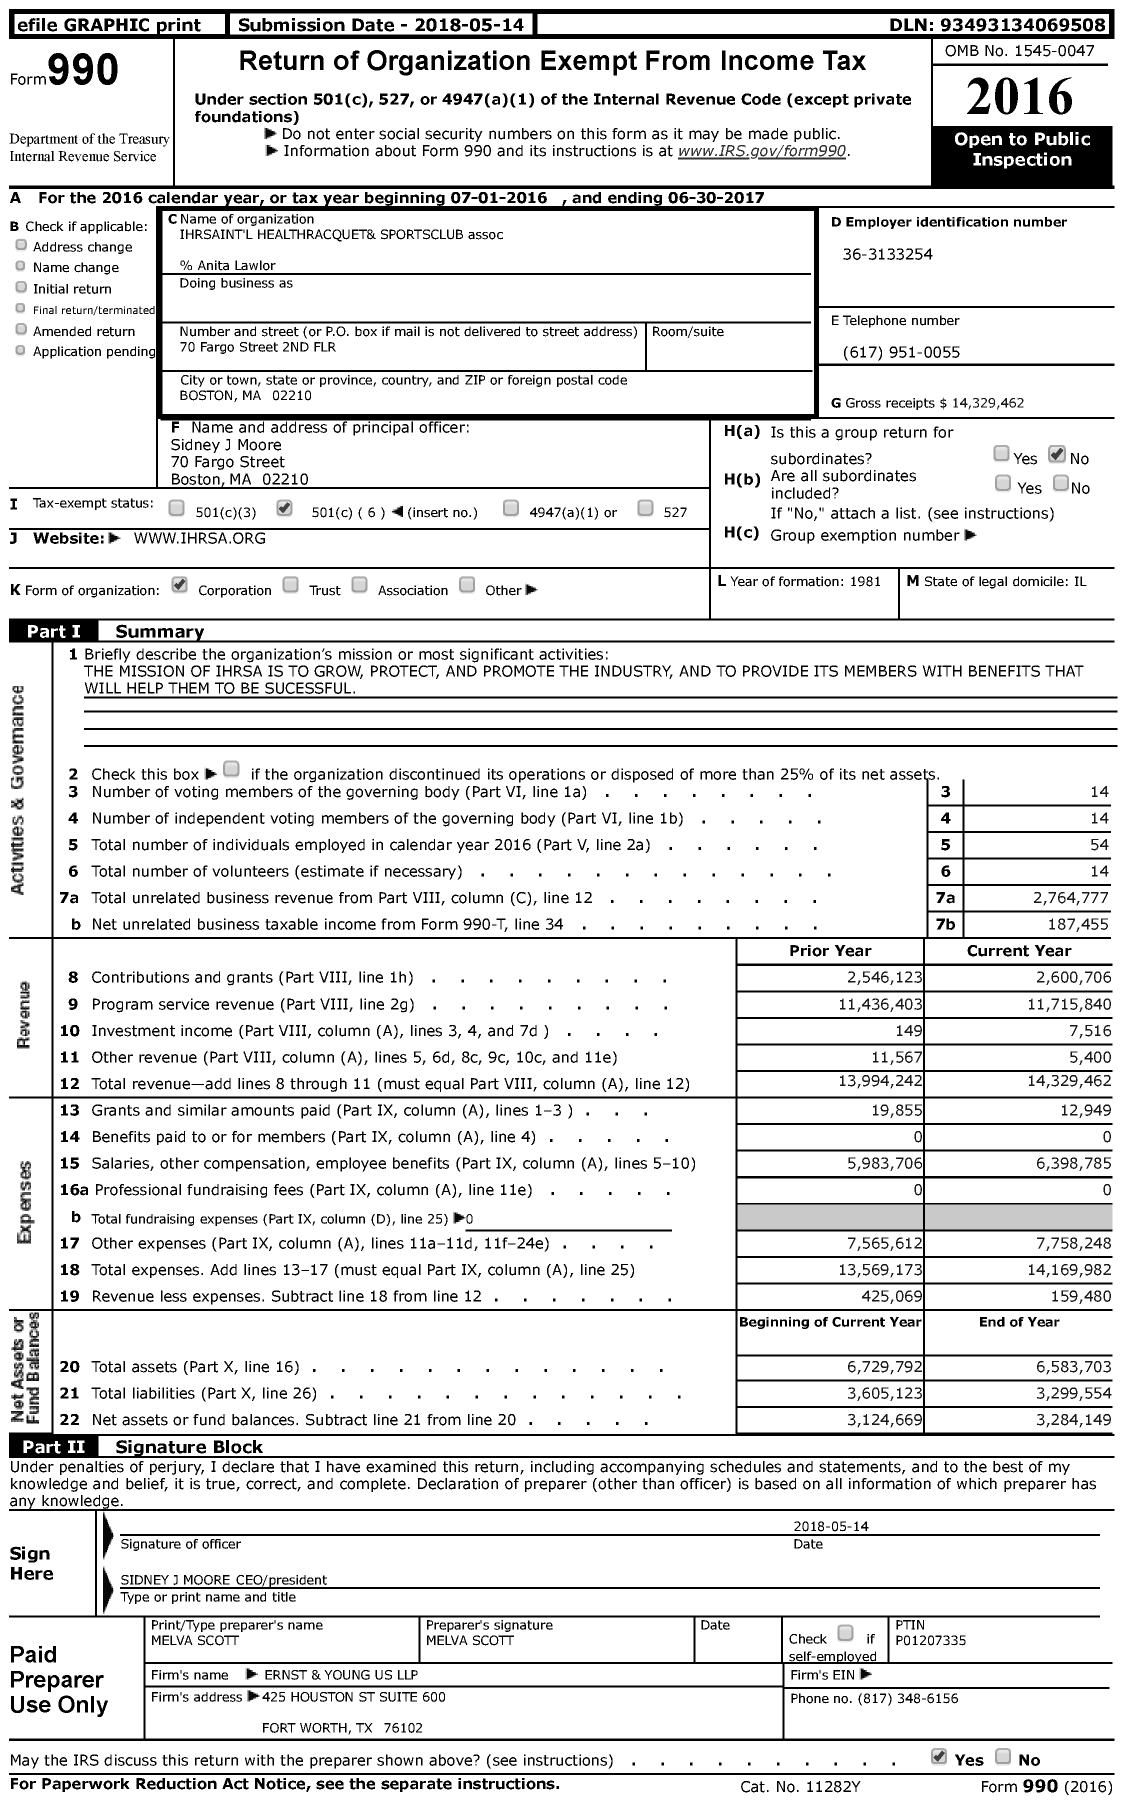 Image of first page of 2016 Form 990 for Ihrsaint'l